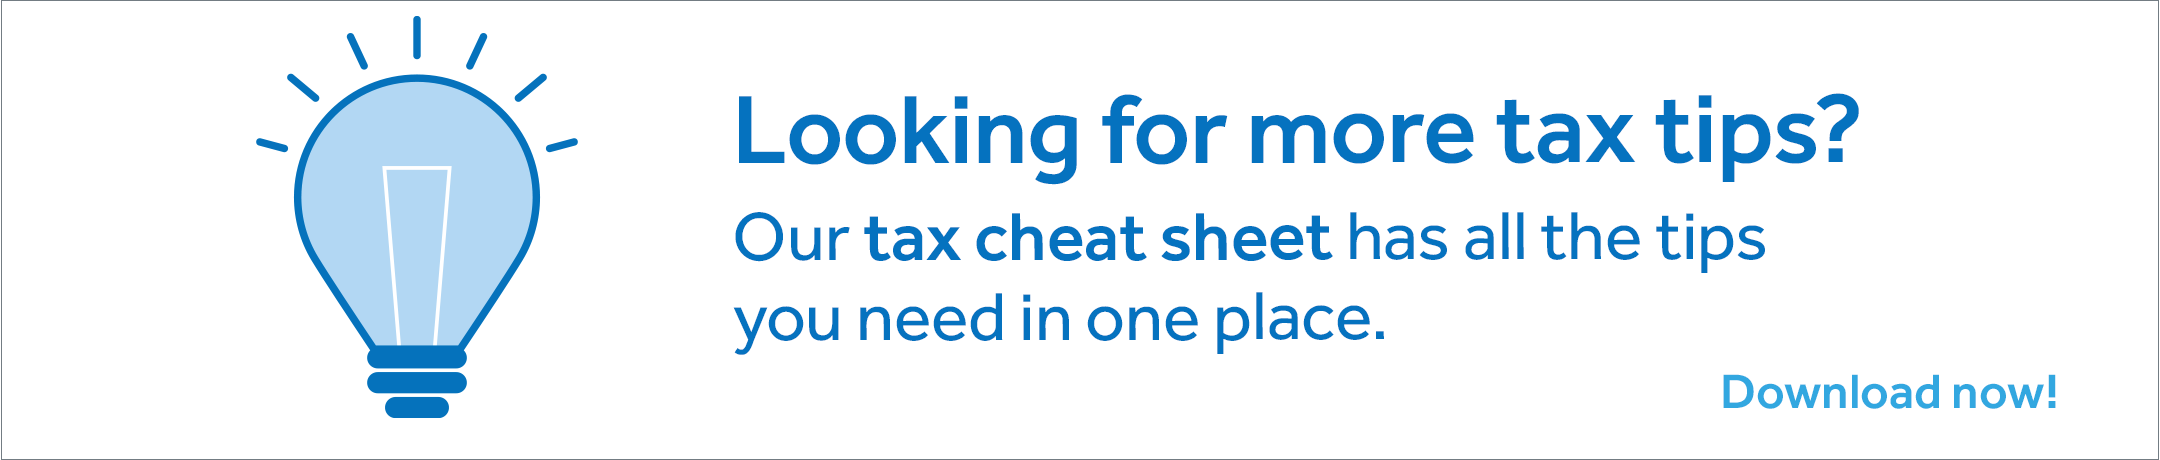 An illustration of a blue light bulb. On the right side, it says: Looking for more tax tips? Our tax cheat sheet has all the tips you need in one place. Download now!